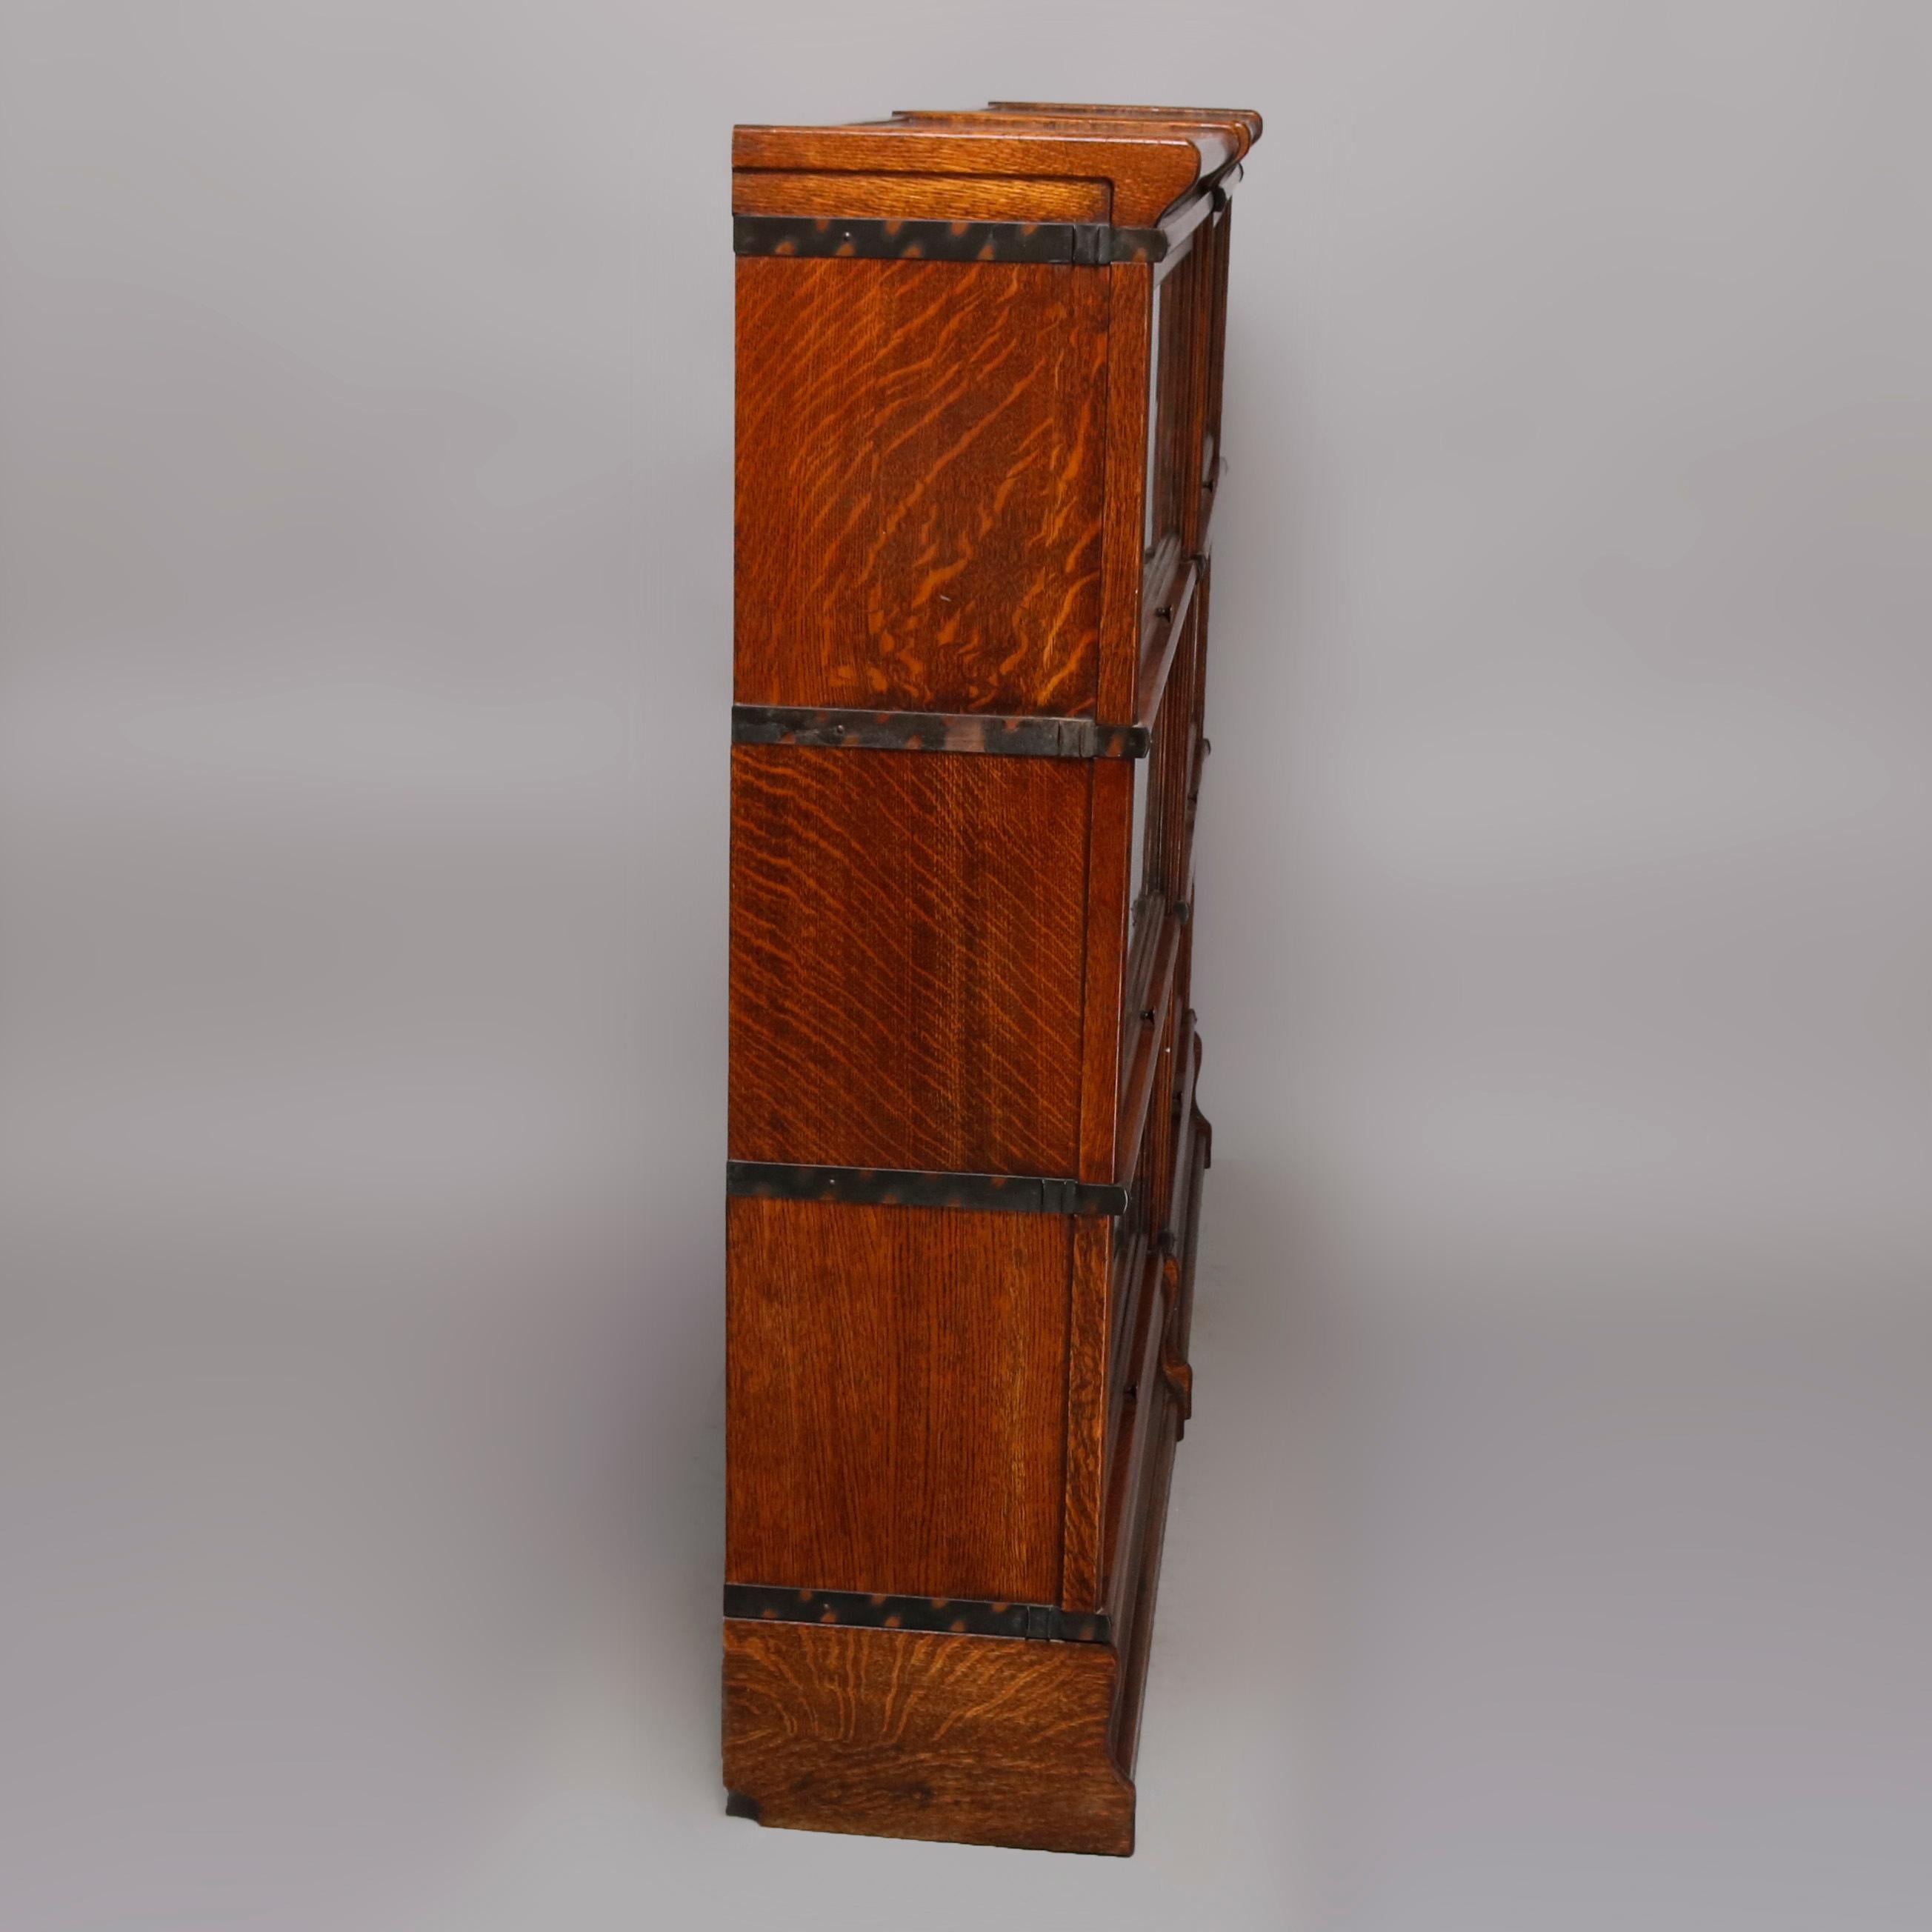 A pair of antique Arts & Crafts barrister bookcases by Macey each offer oak construction with Finish 2 and having three sections with glass doors, crown and base, original label as photographed, circa 1920

Measures: 49